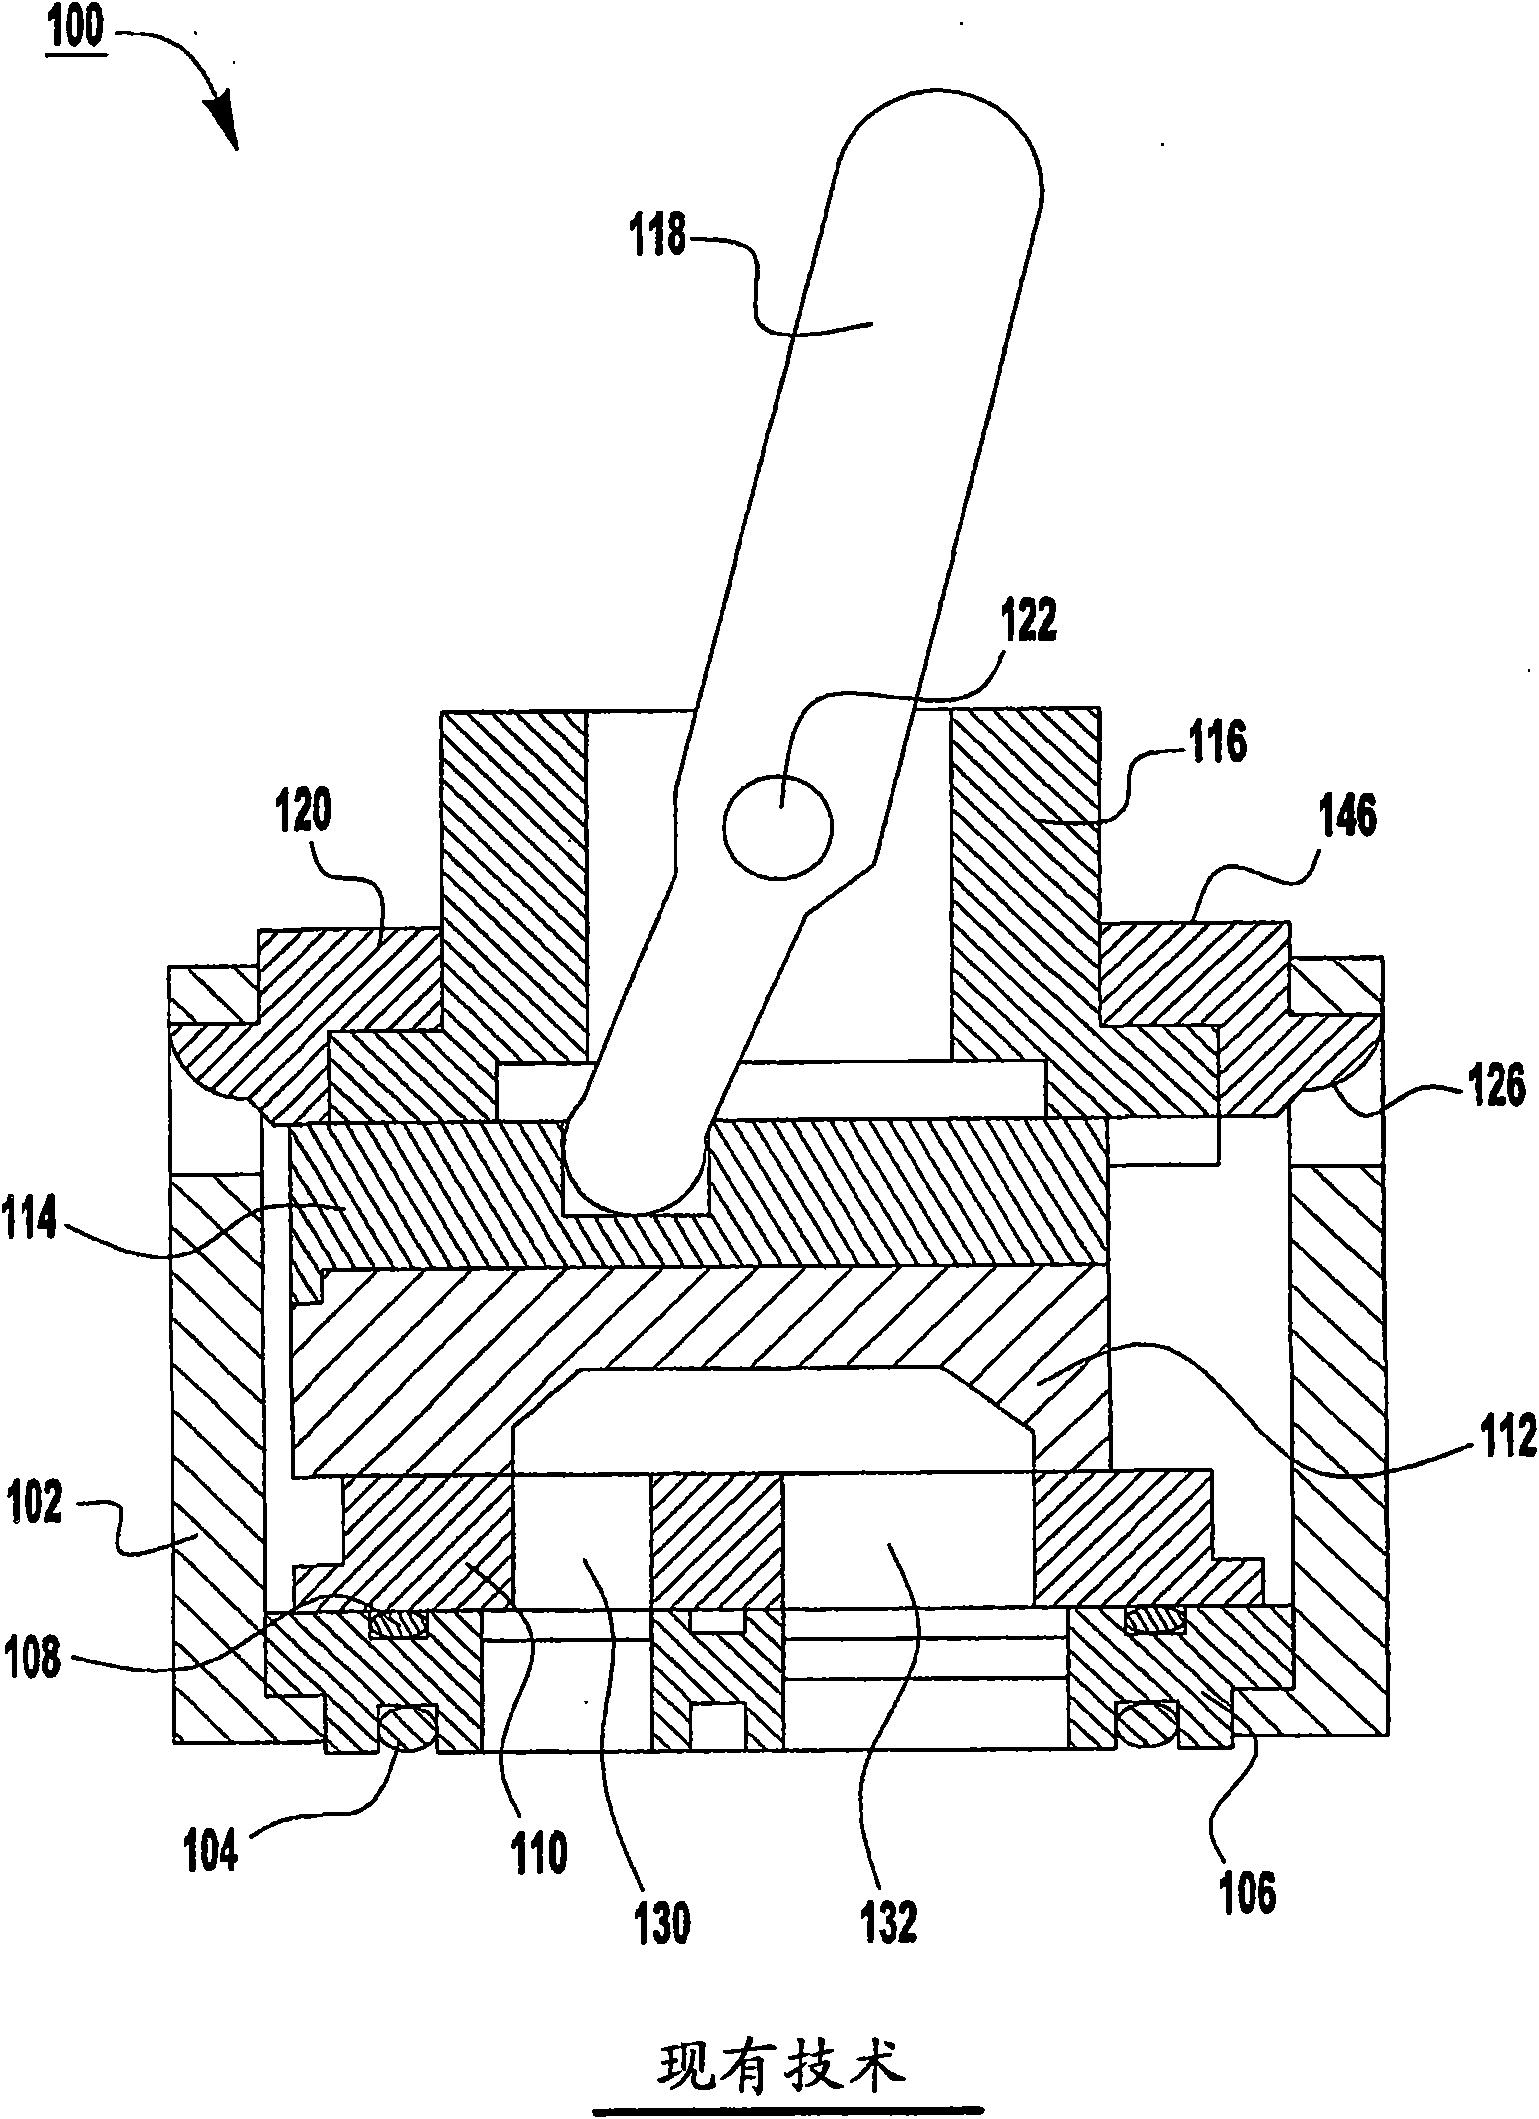 Valve cartridge with low point of contact for installation